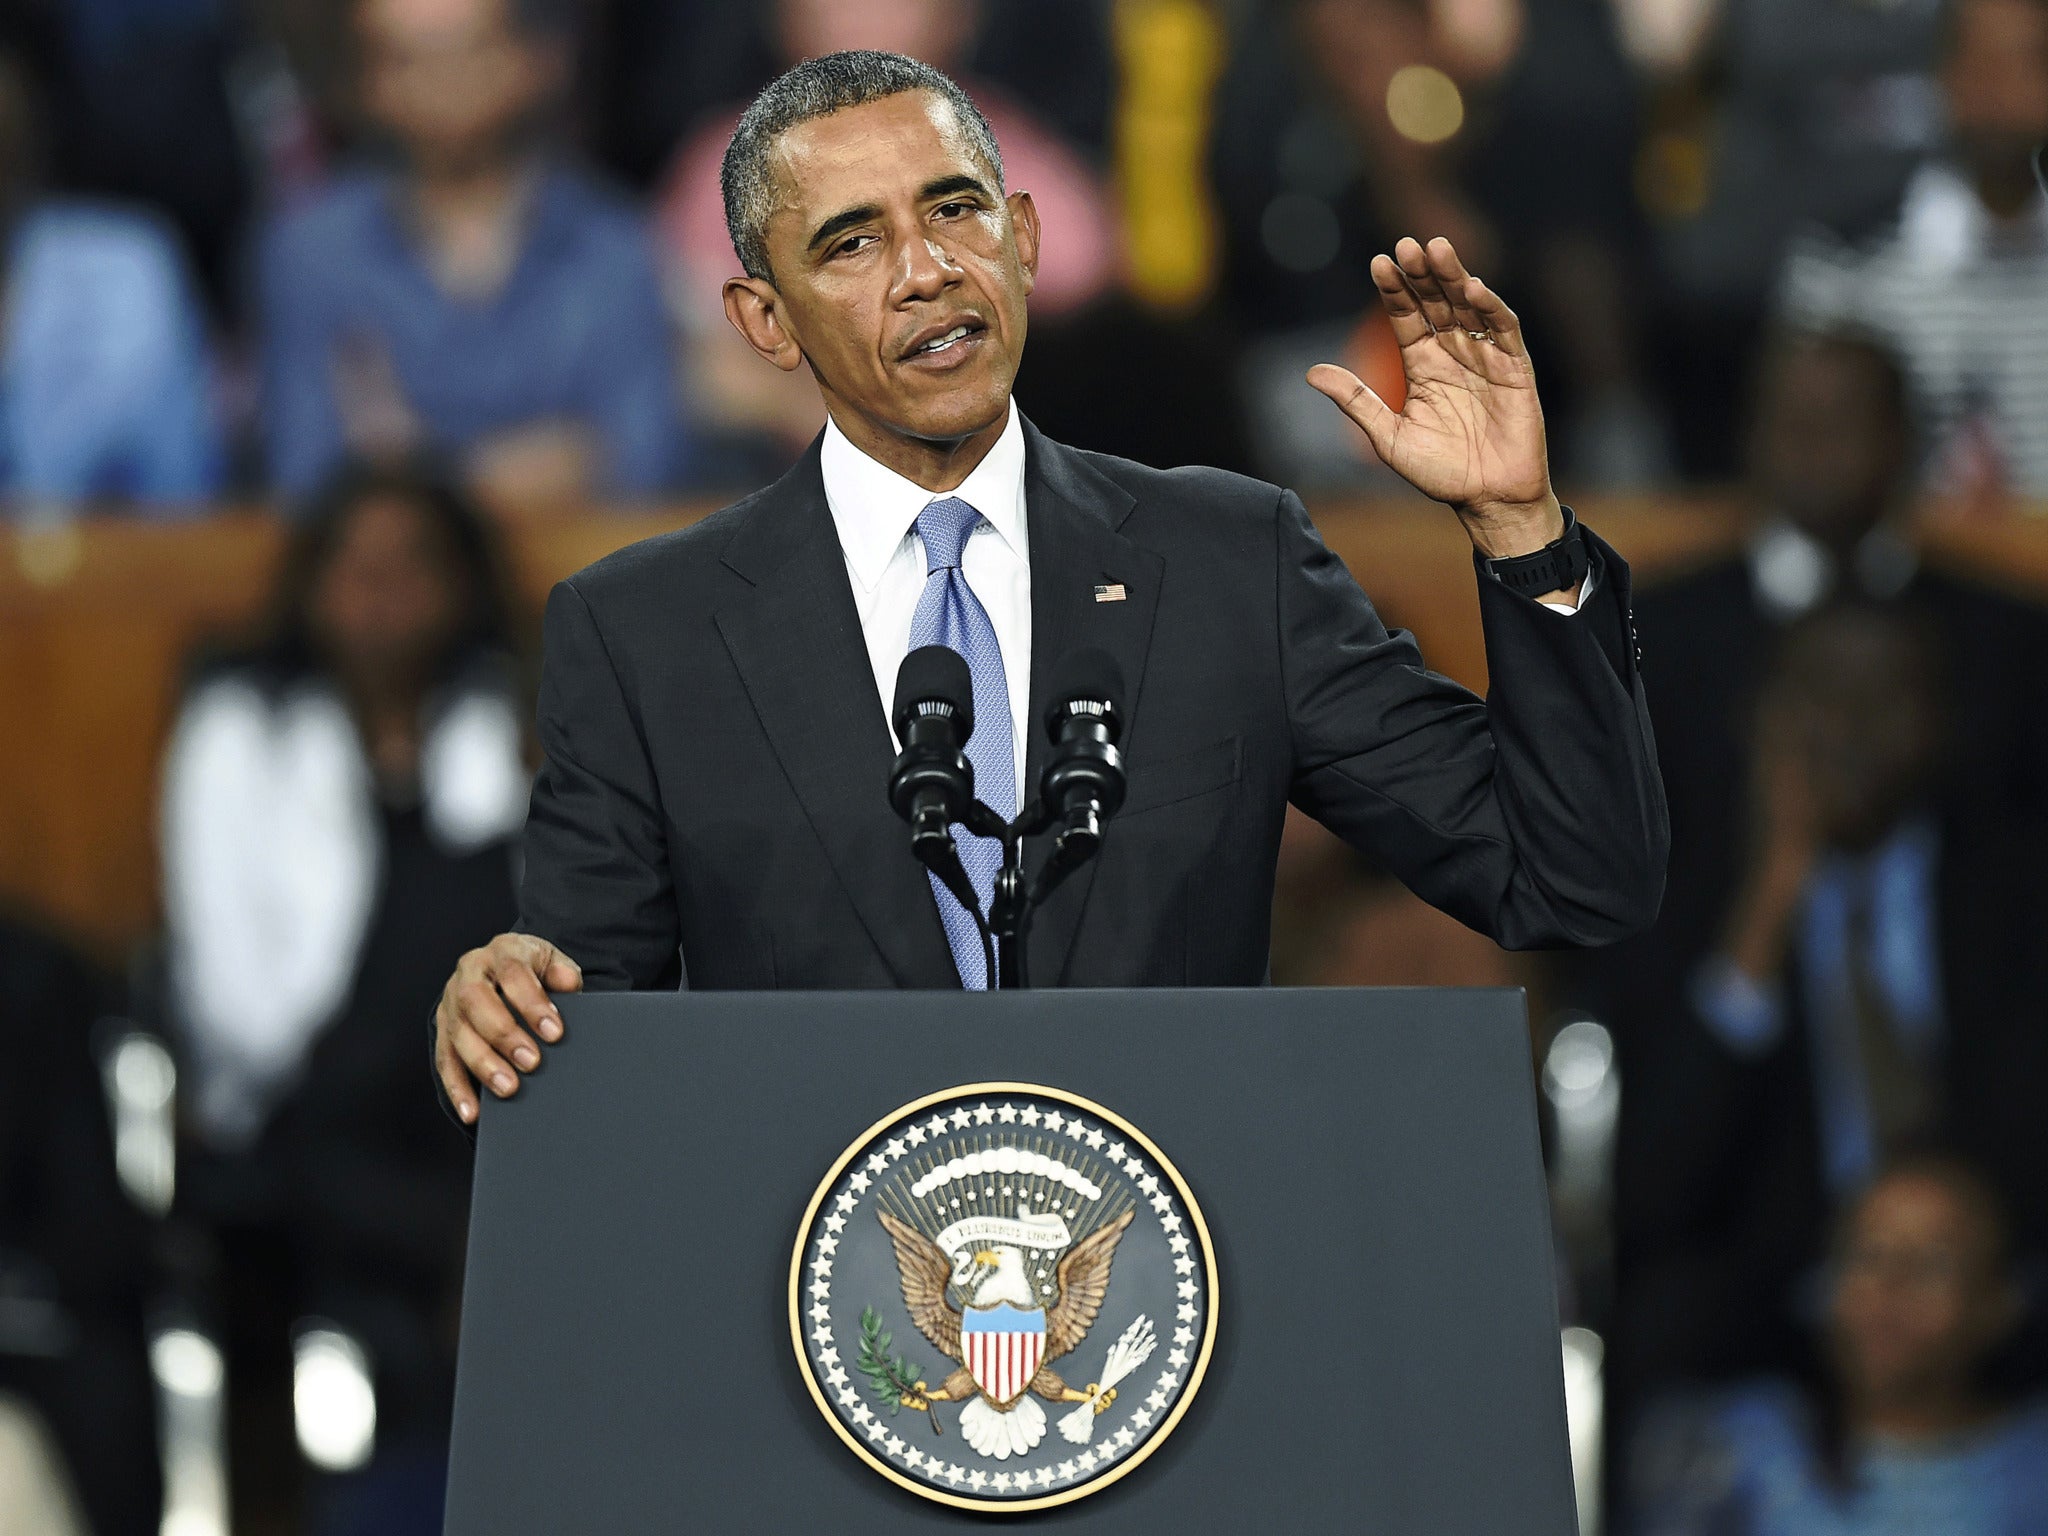 Obama addresses a crowd of 4,500 at the Nairobi sports arena